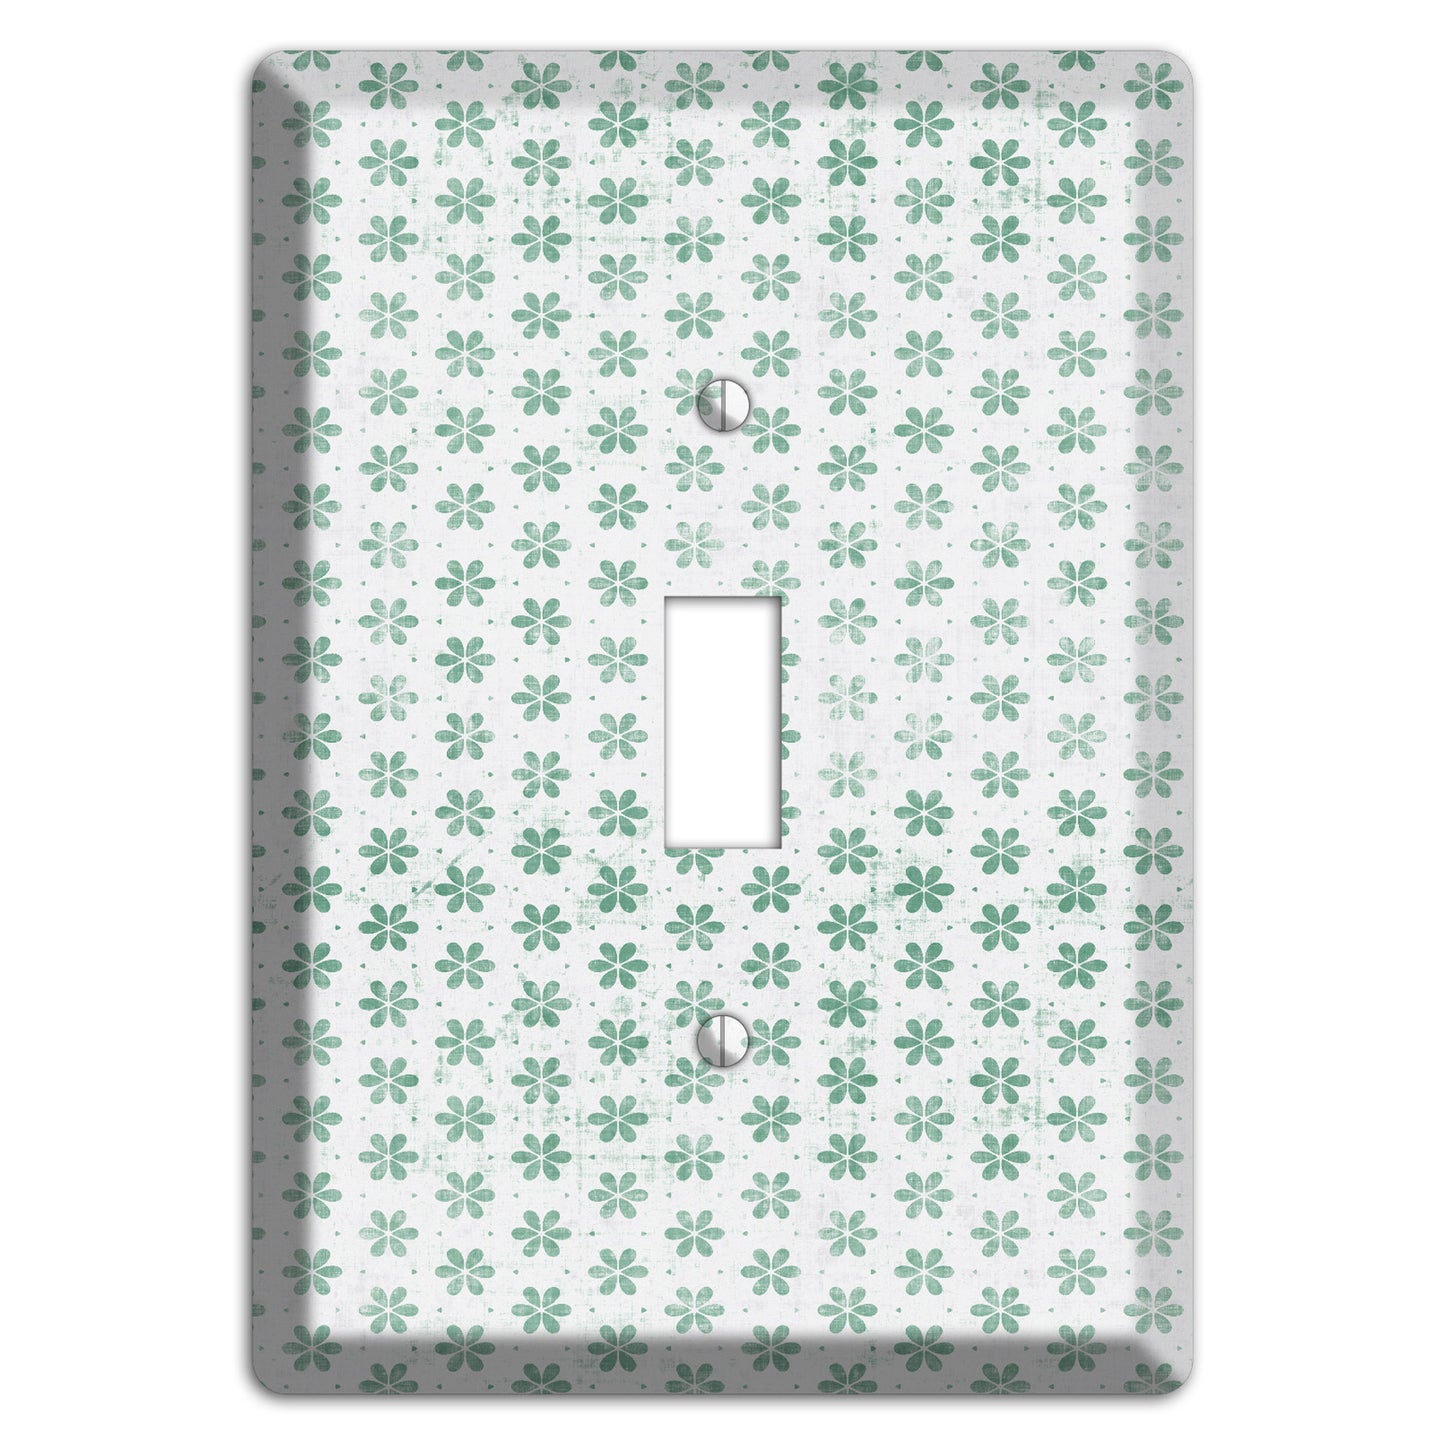 White with Green Grunge Floral Contour Cover Plates